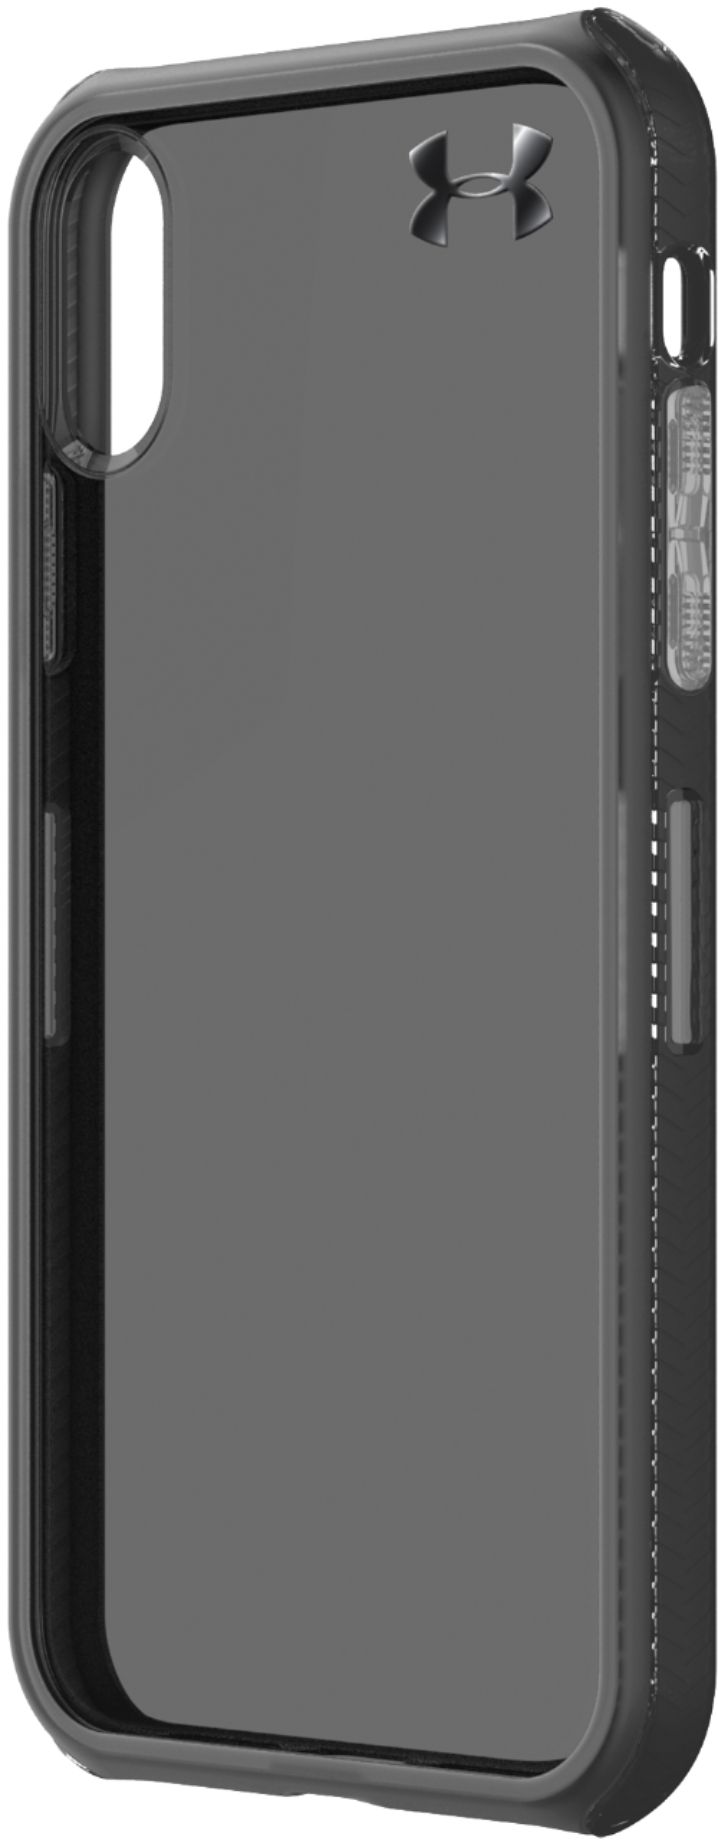 Under Armour - Protect Verge Case for Apple® iPhone® XR - Gray/Black